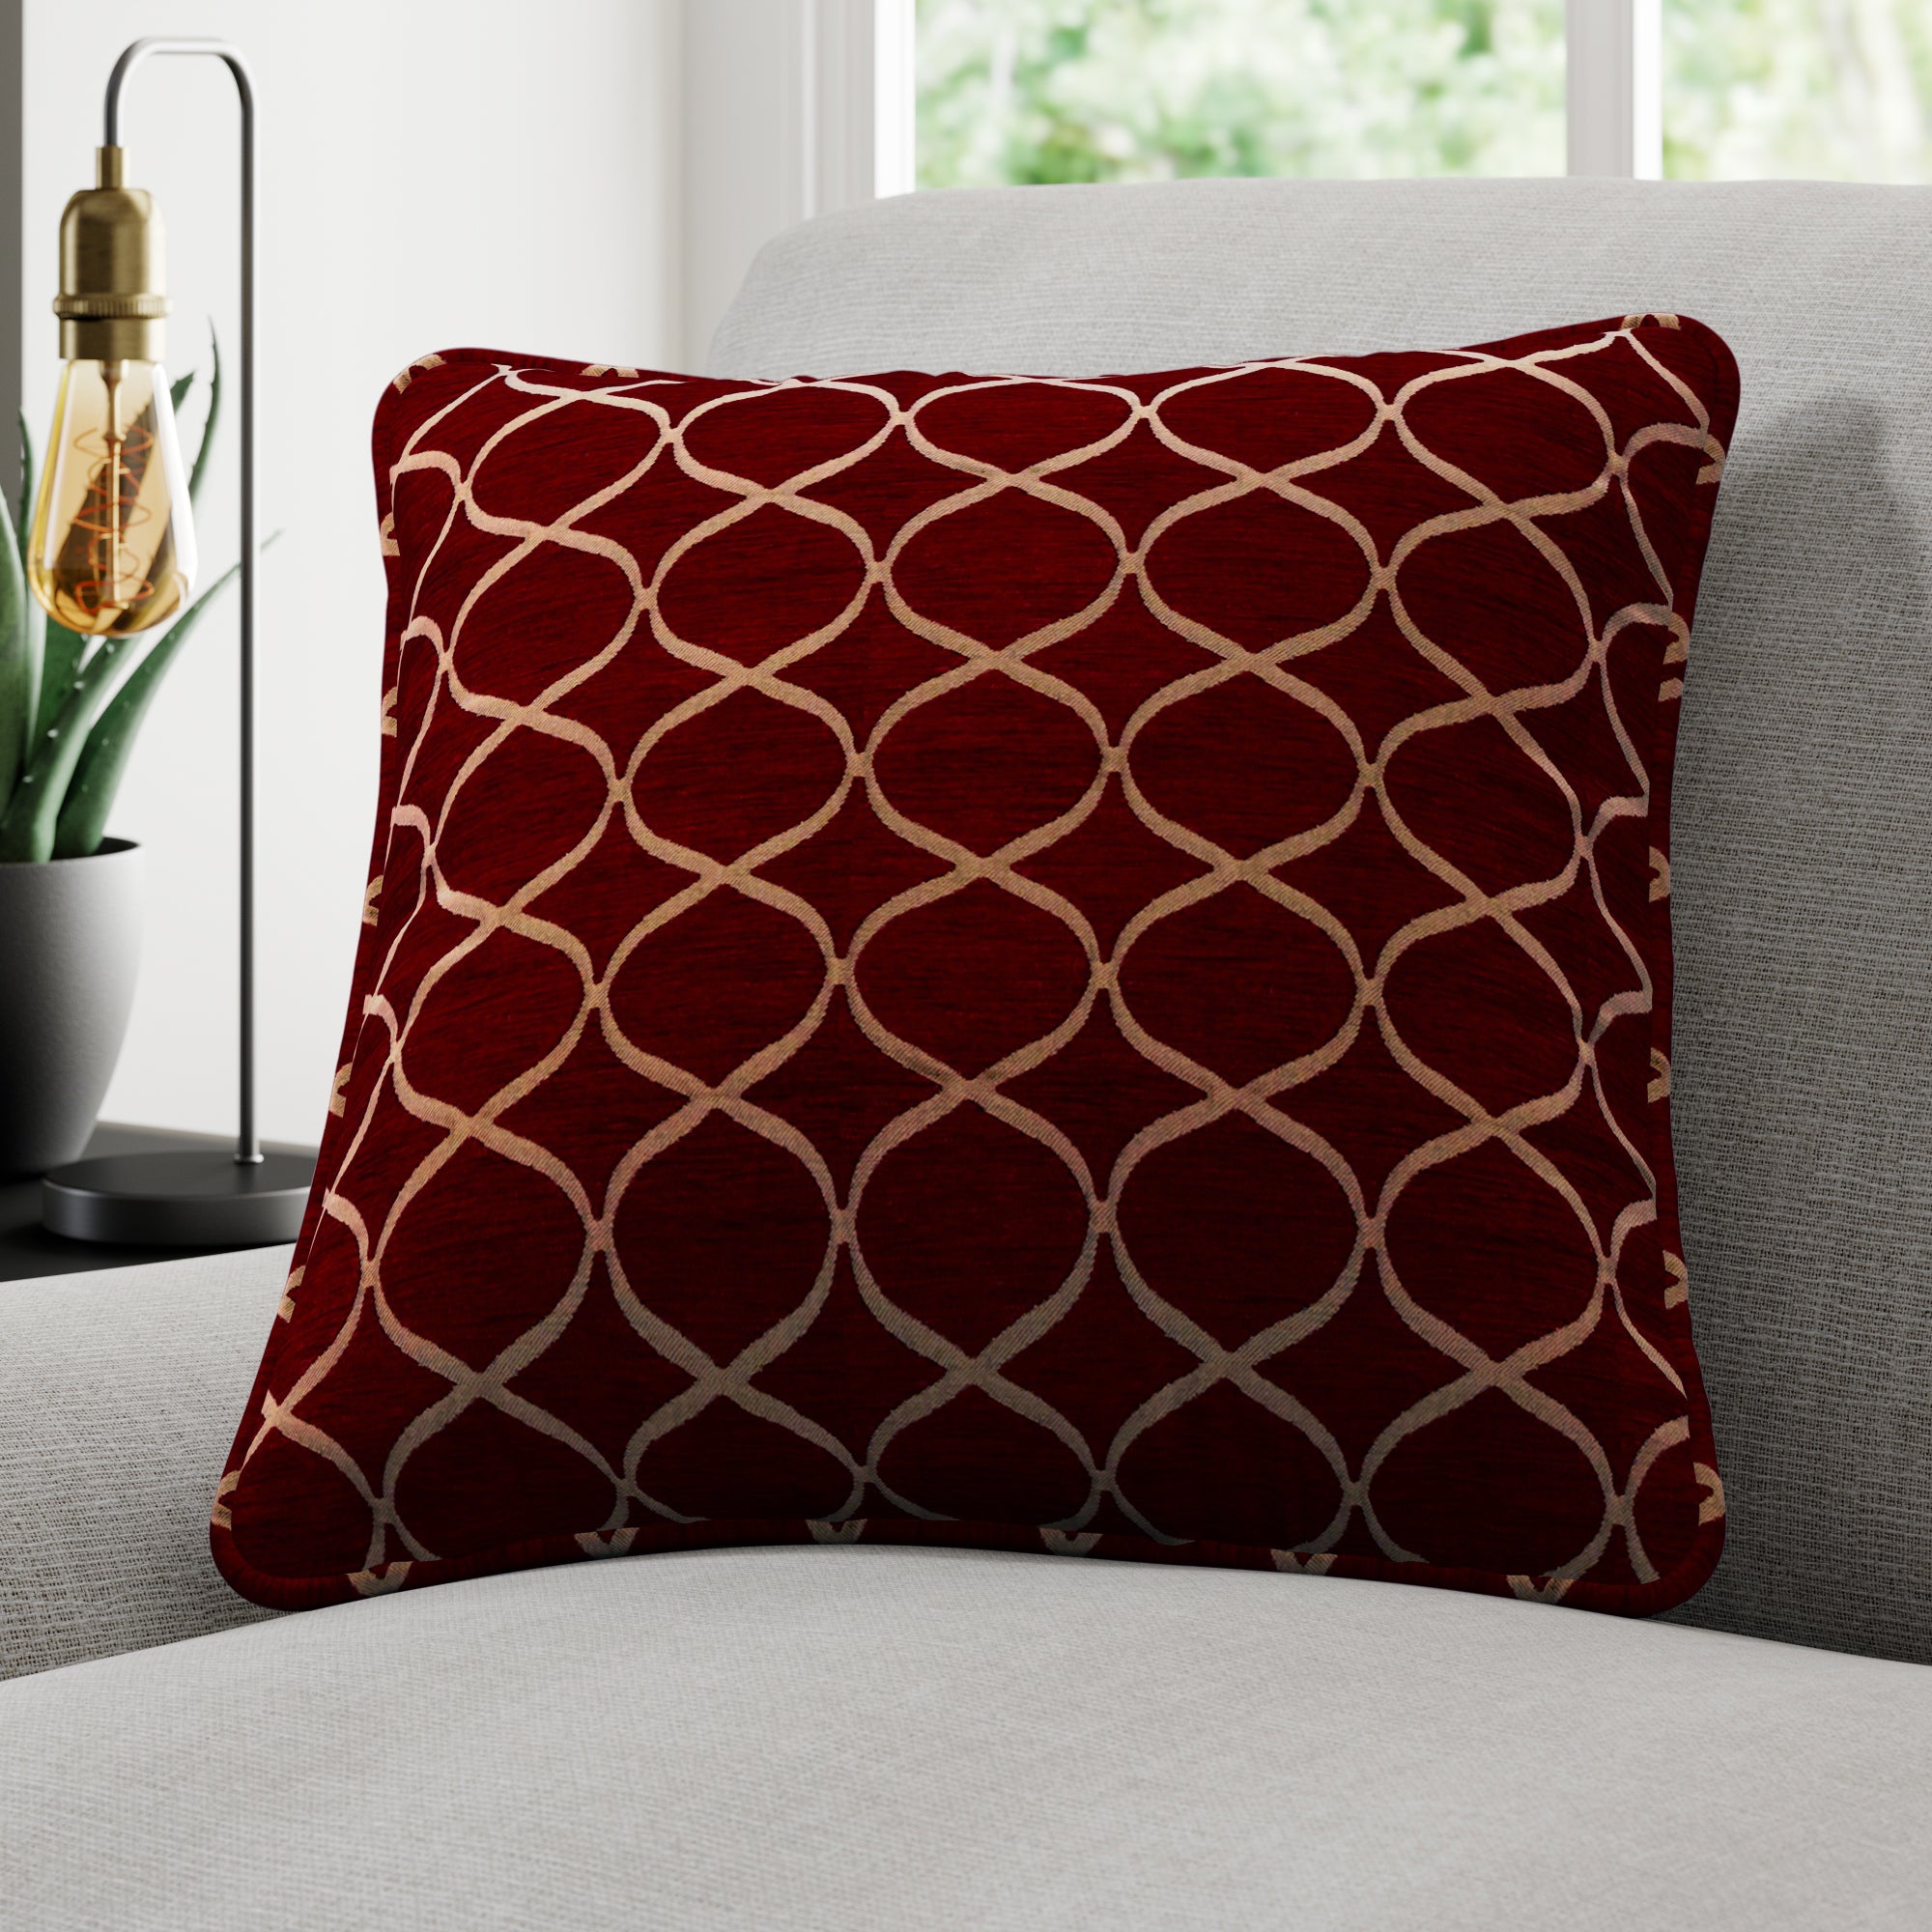 Trellis Made to Order Cushion Cover Trellis Rosso